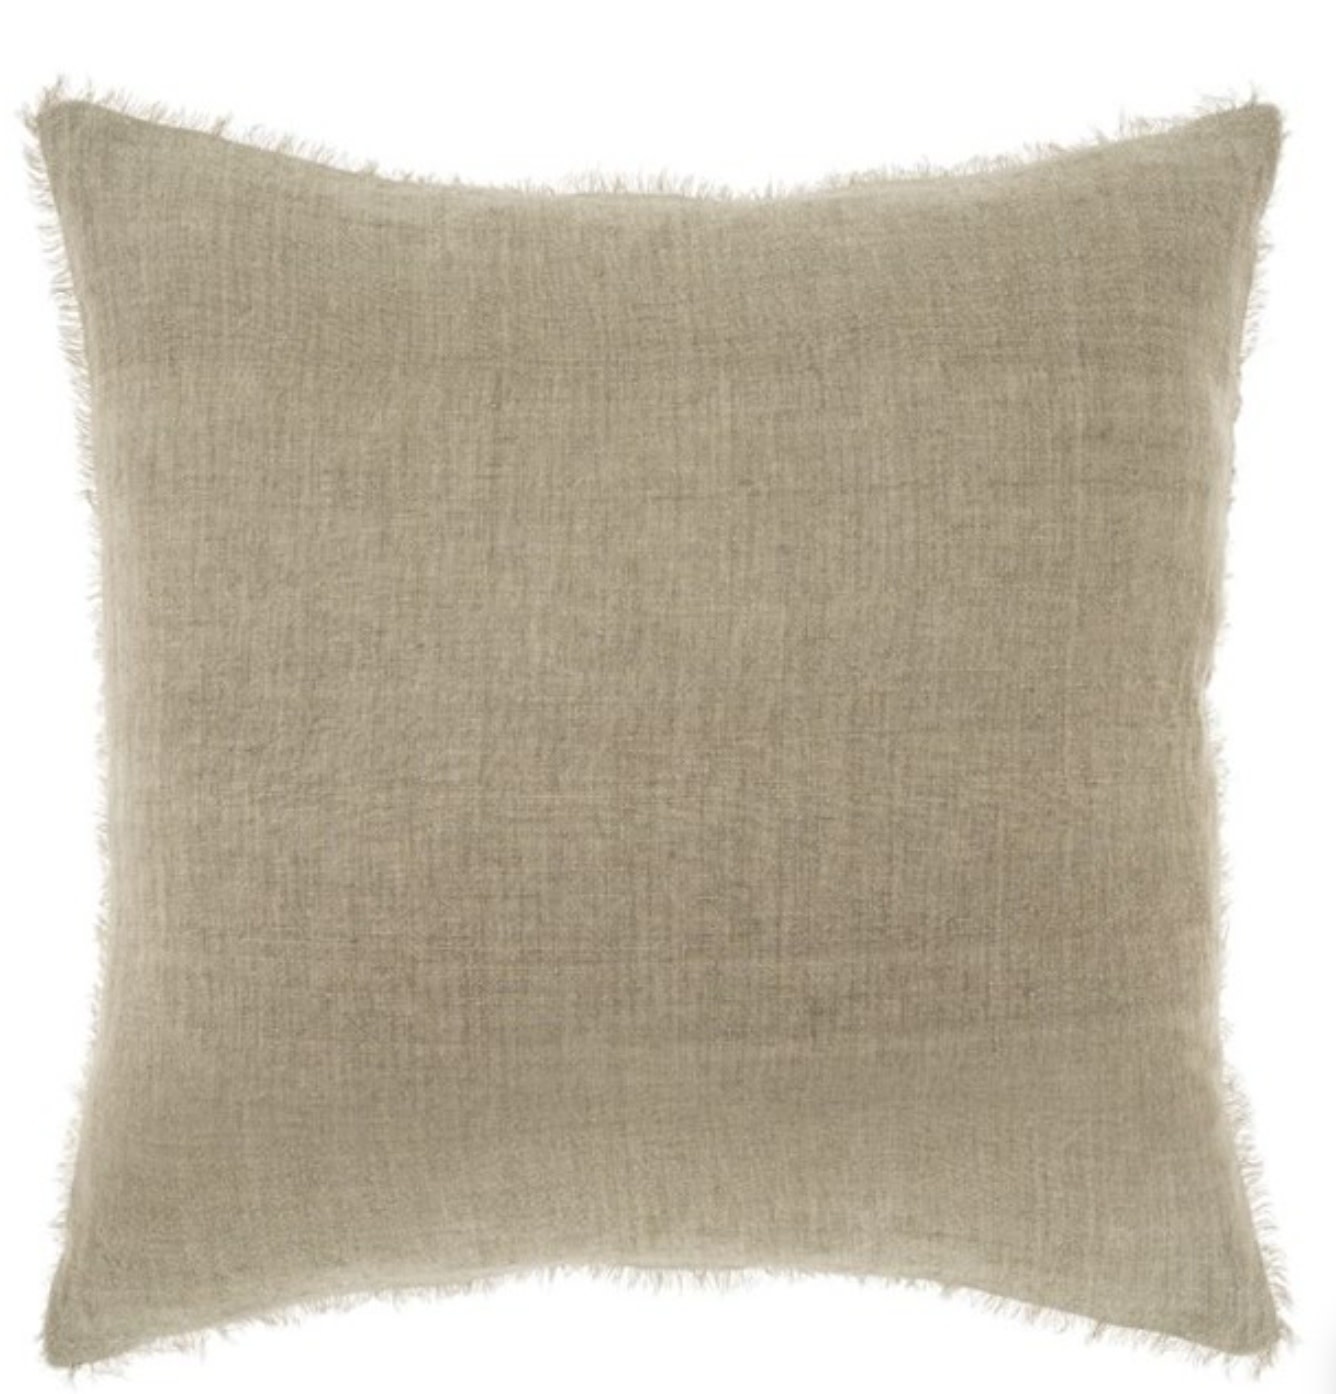 Lina Linen Pillow, Sand, 20 in. x 20 in.